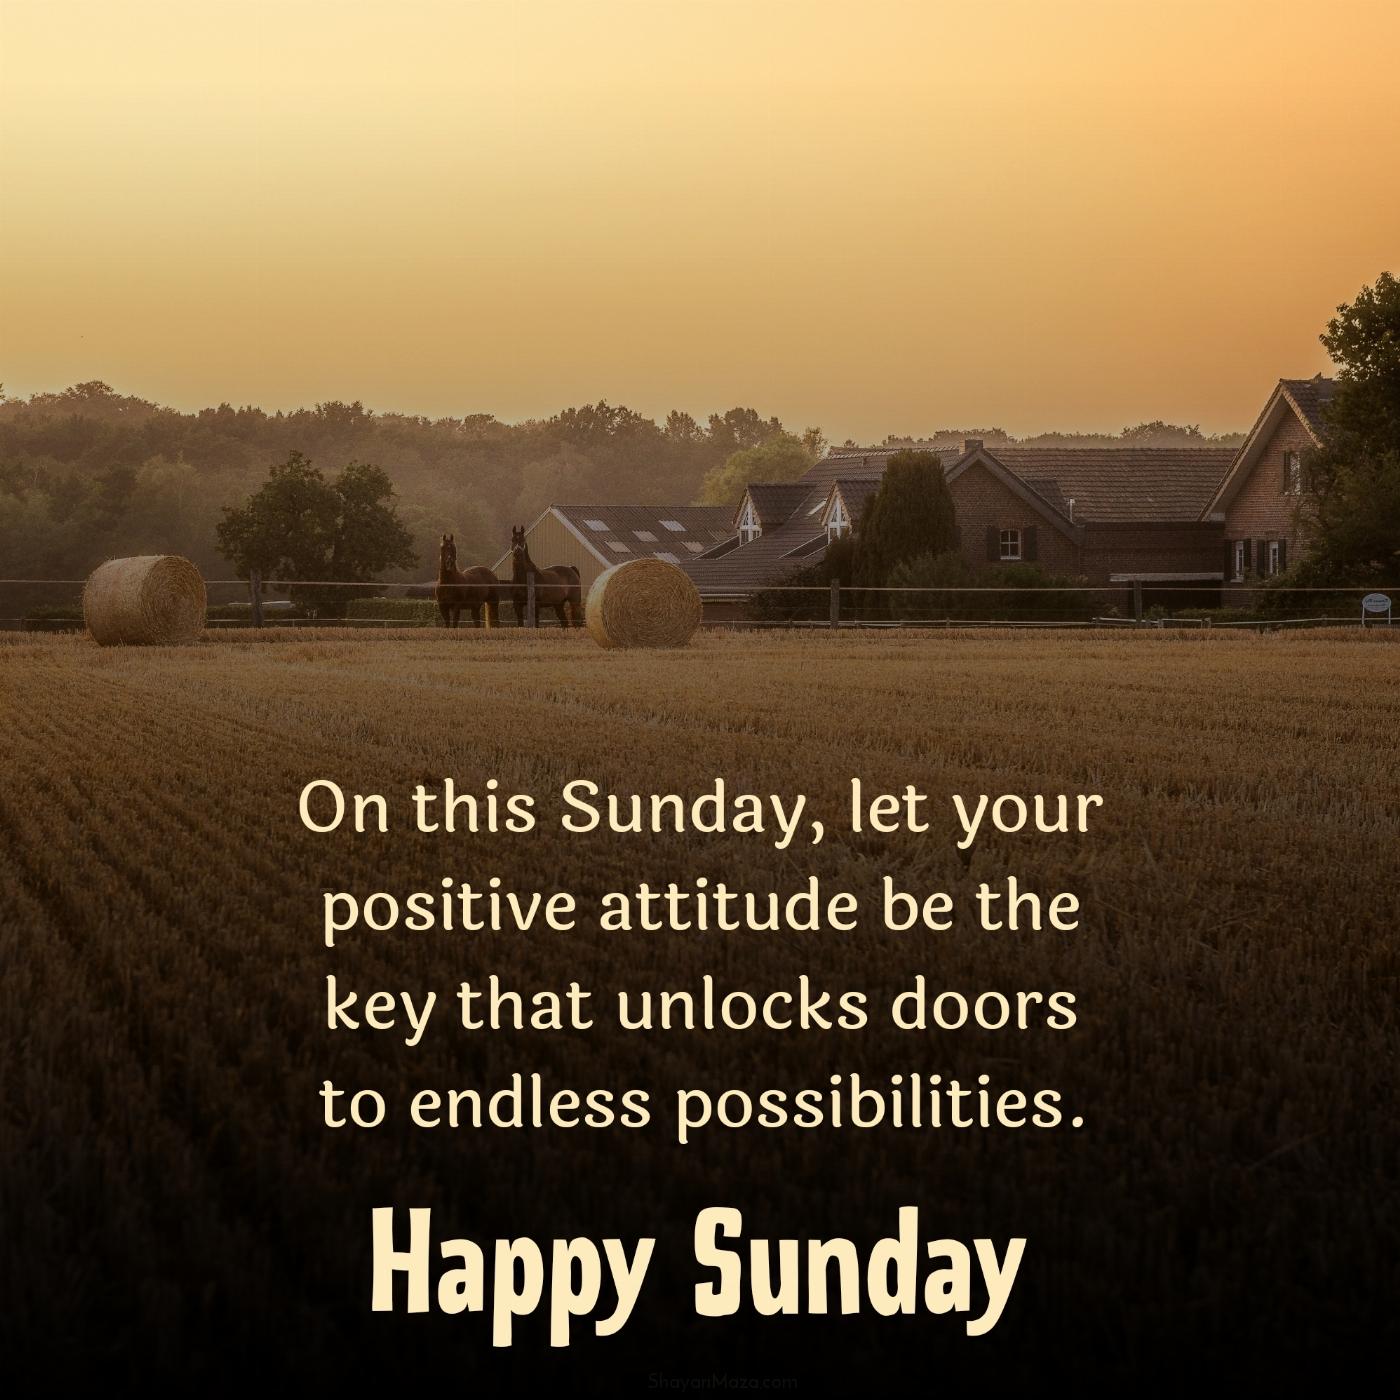 On this Sunday let your positive attitude be the key that unlocks